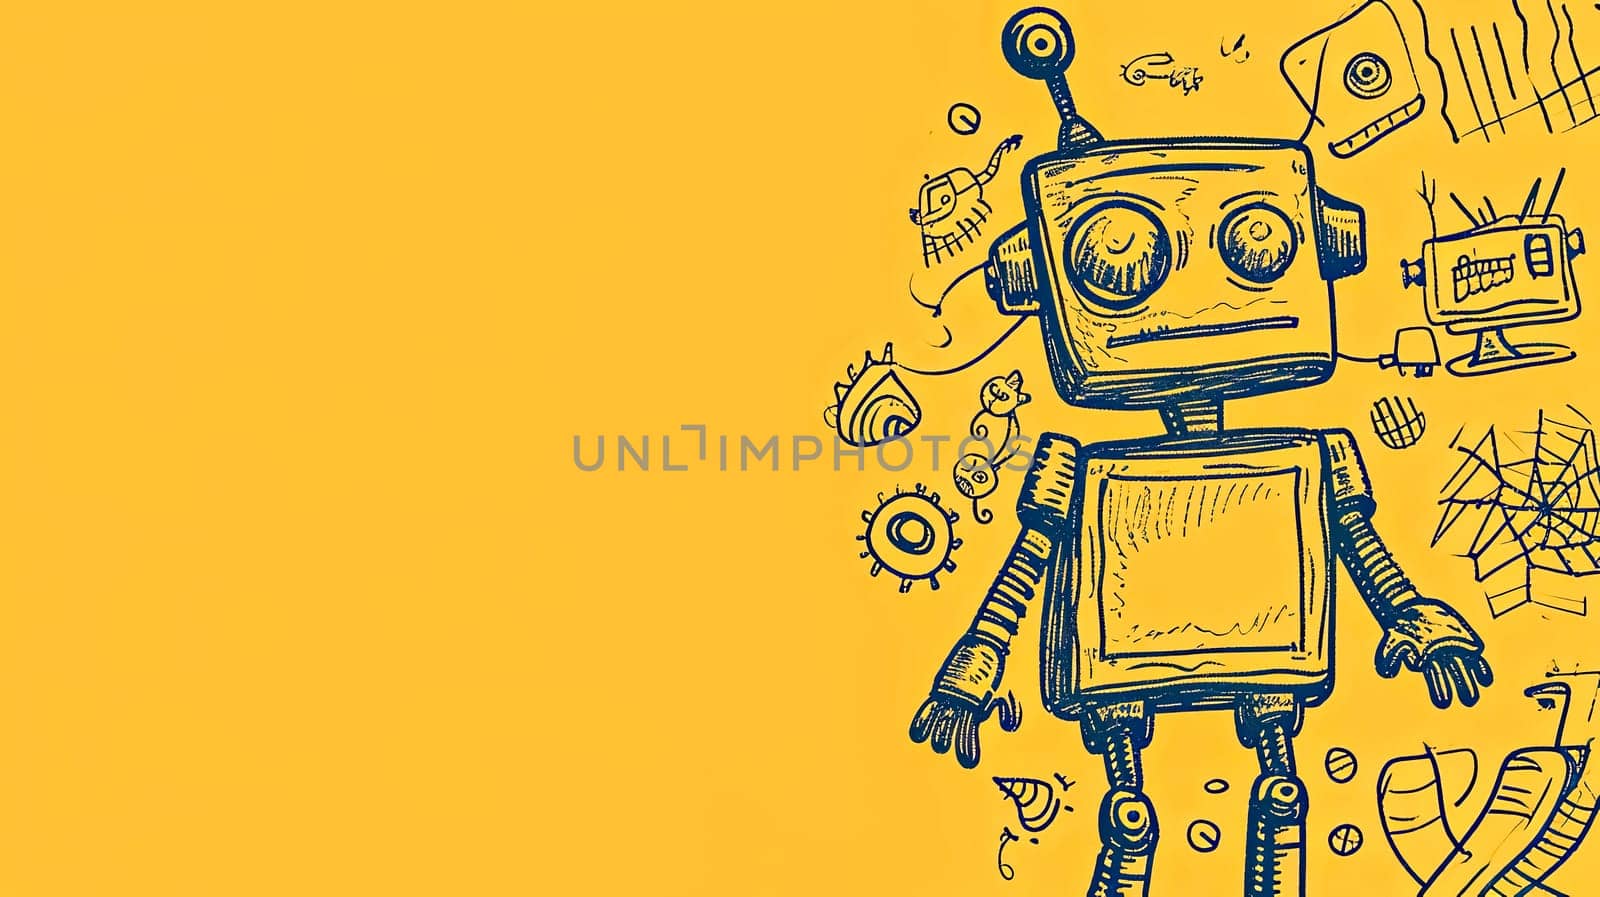 playful sketch of a robot and various whimsical doodles, depicted in a blue line drawing style against a vibrant yellow background, giving off a quirky and inventive vibe, copy space